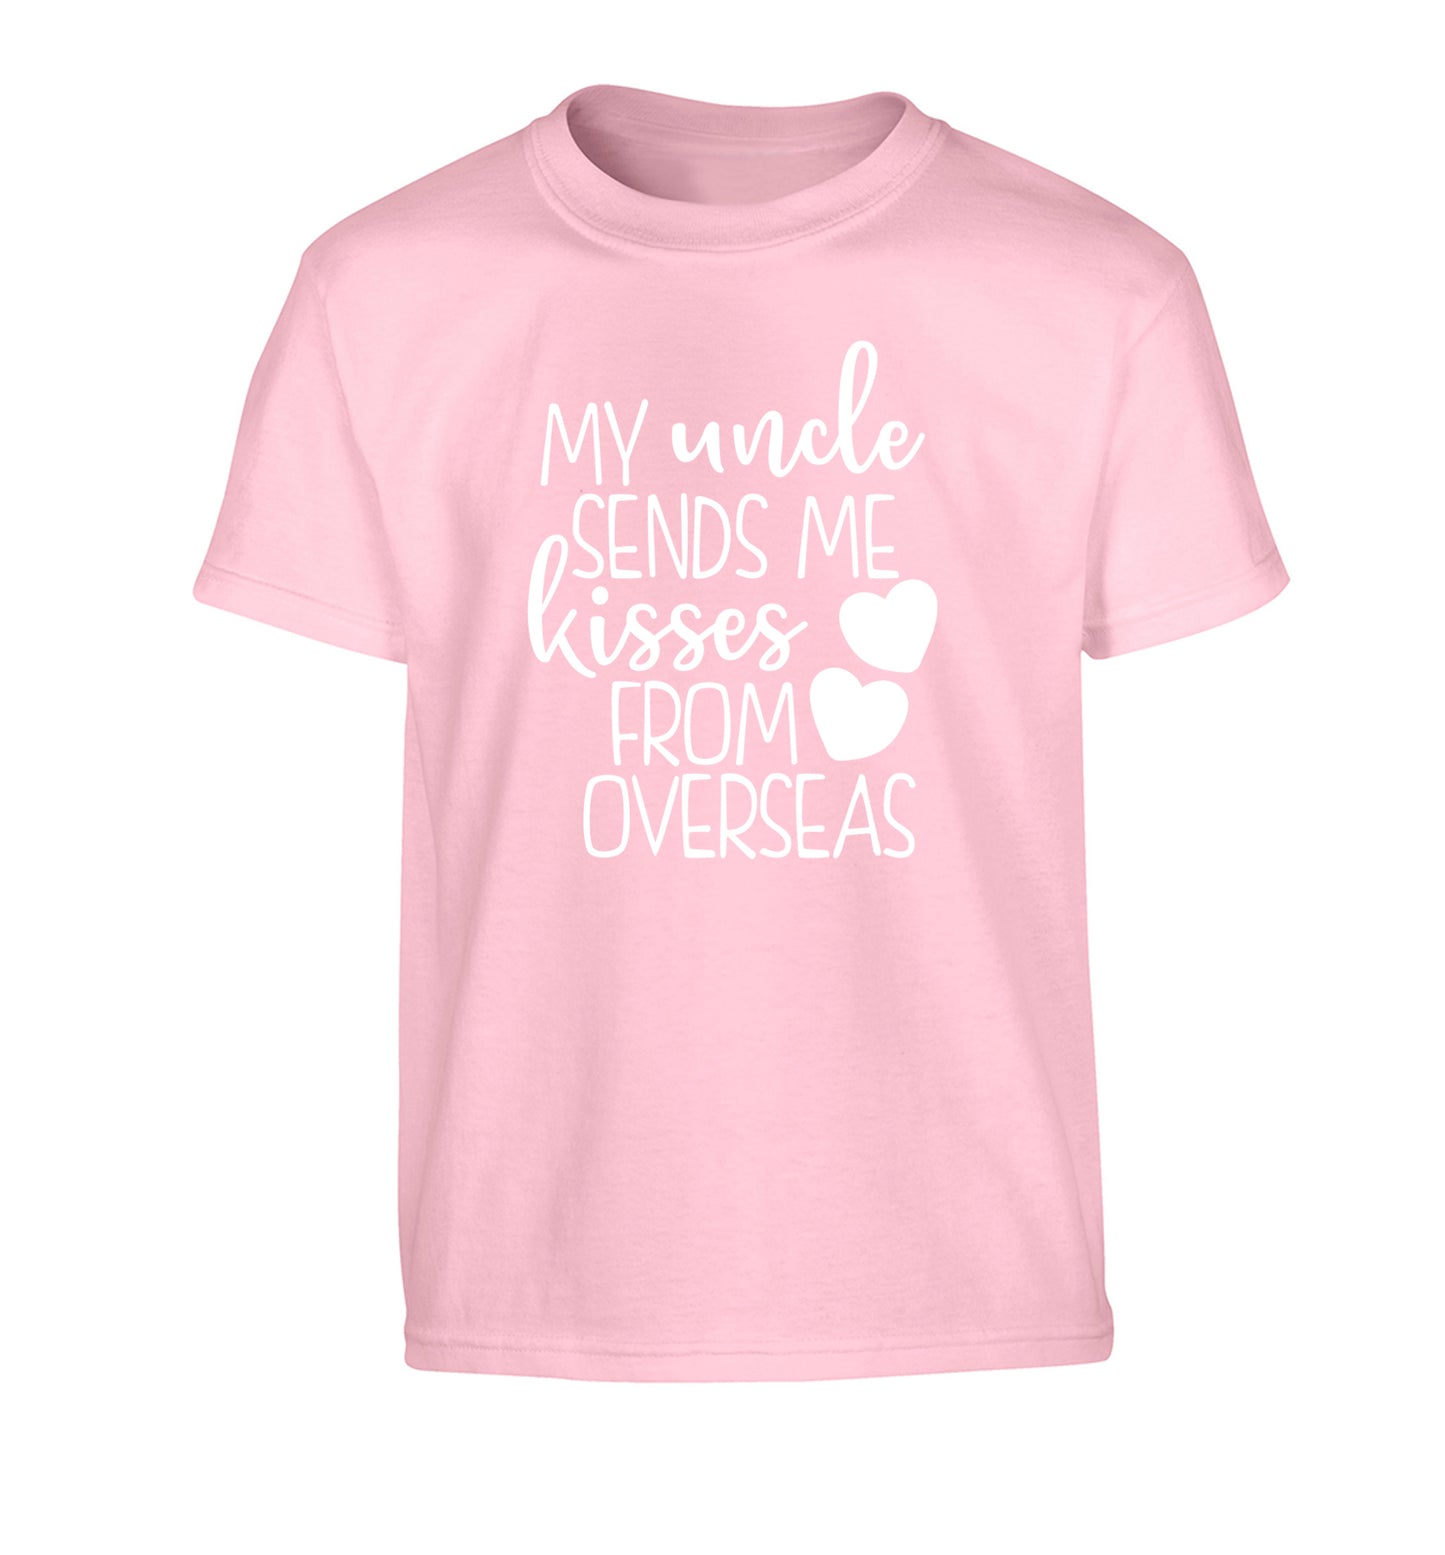 My uncle sends me kisses from overseas Children's light pink Tshirt 12-13 Years